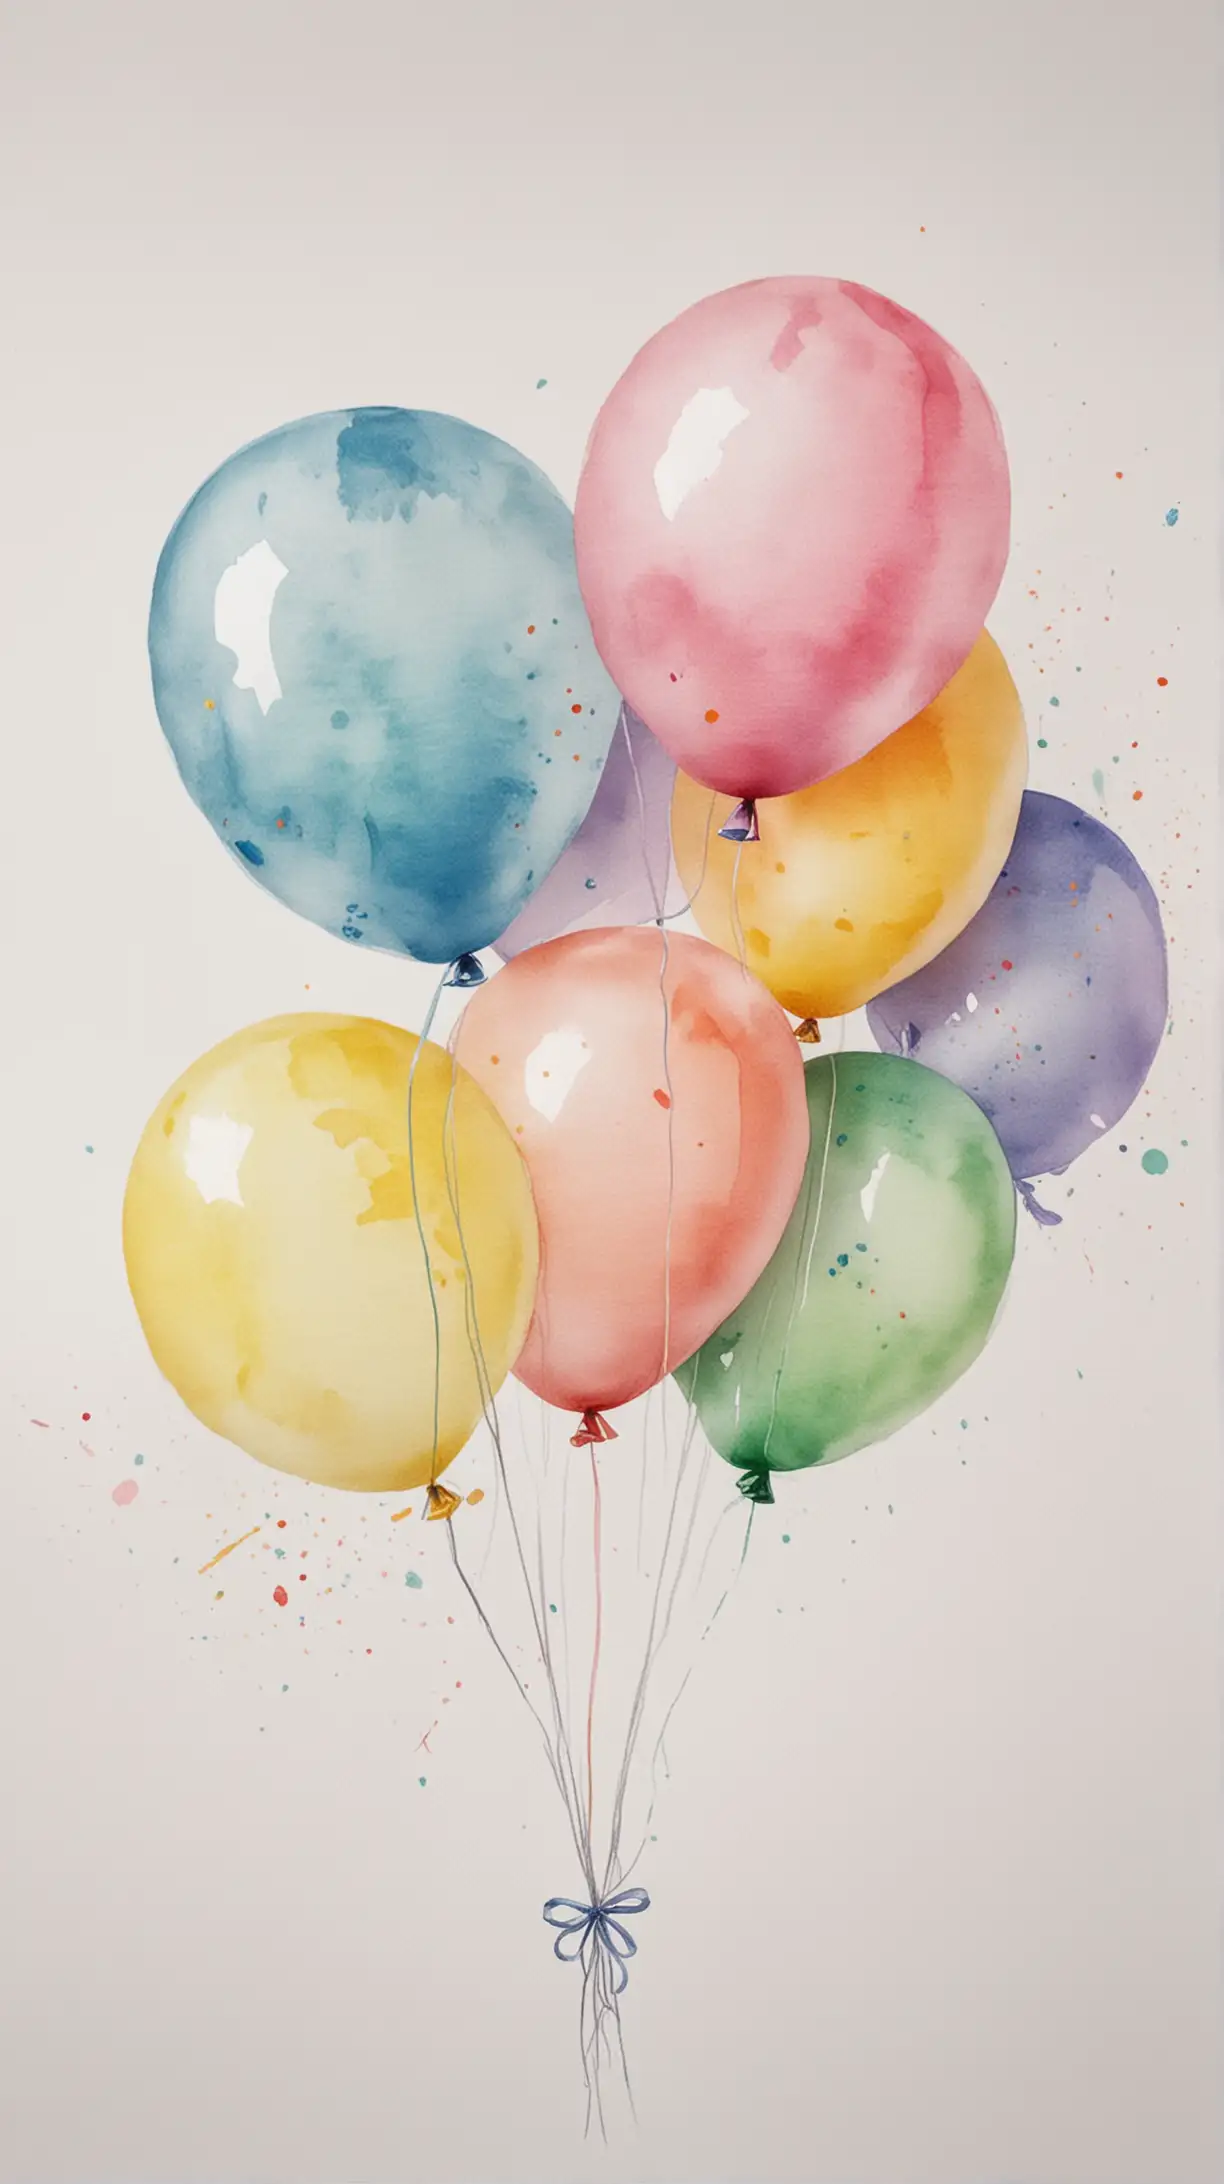 watercolor pastel balloons with a white background